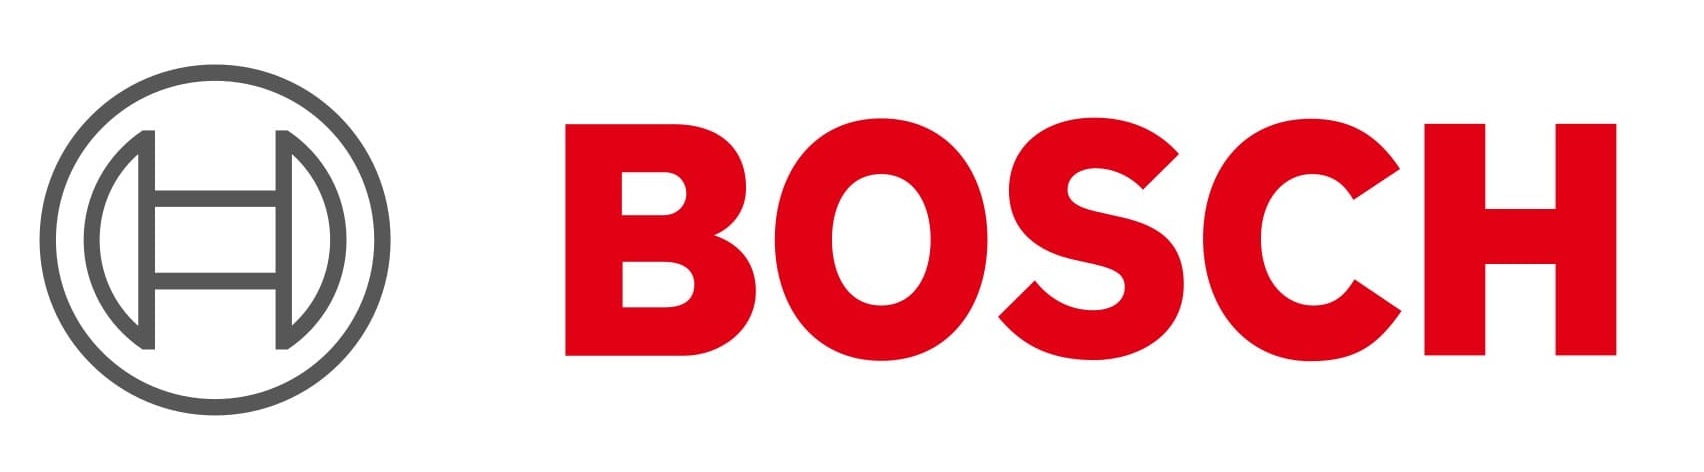 BOSCH Dishwasher Service Cost, Kenmore Dishwasher Service Cost